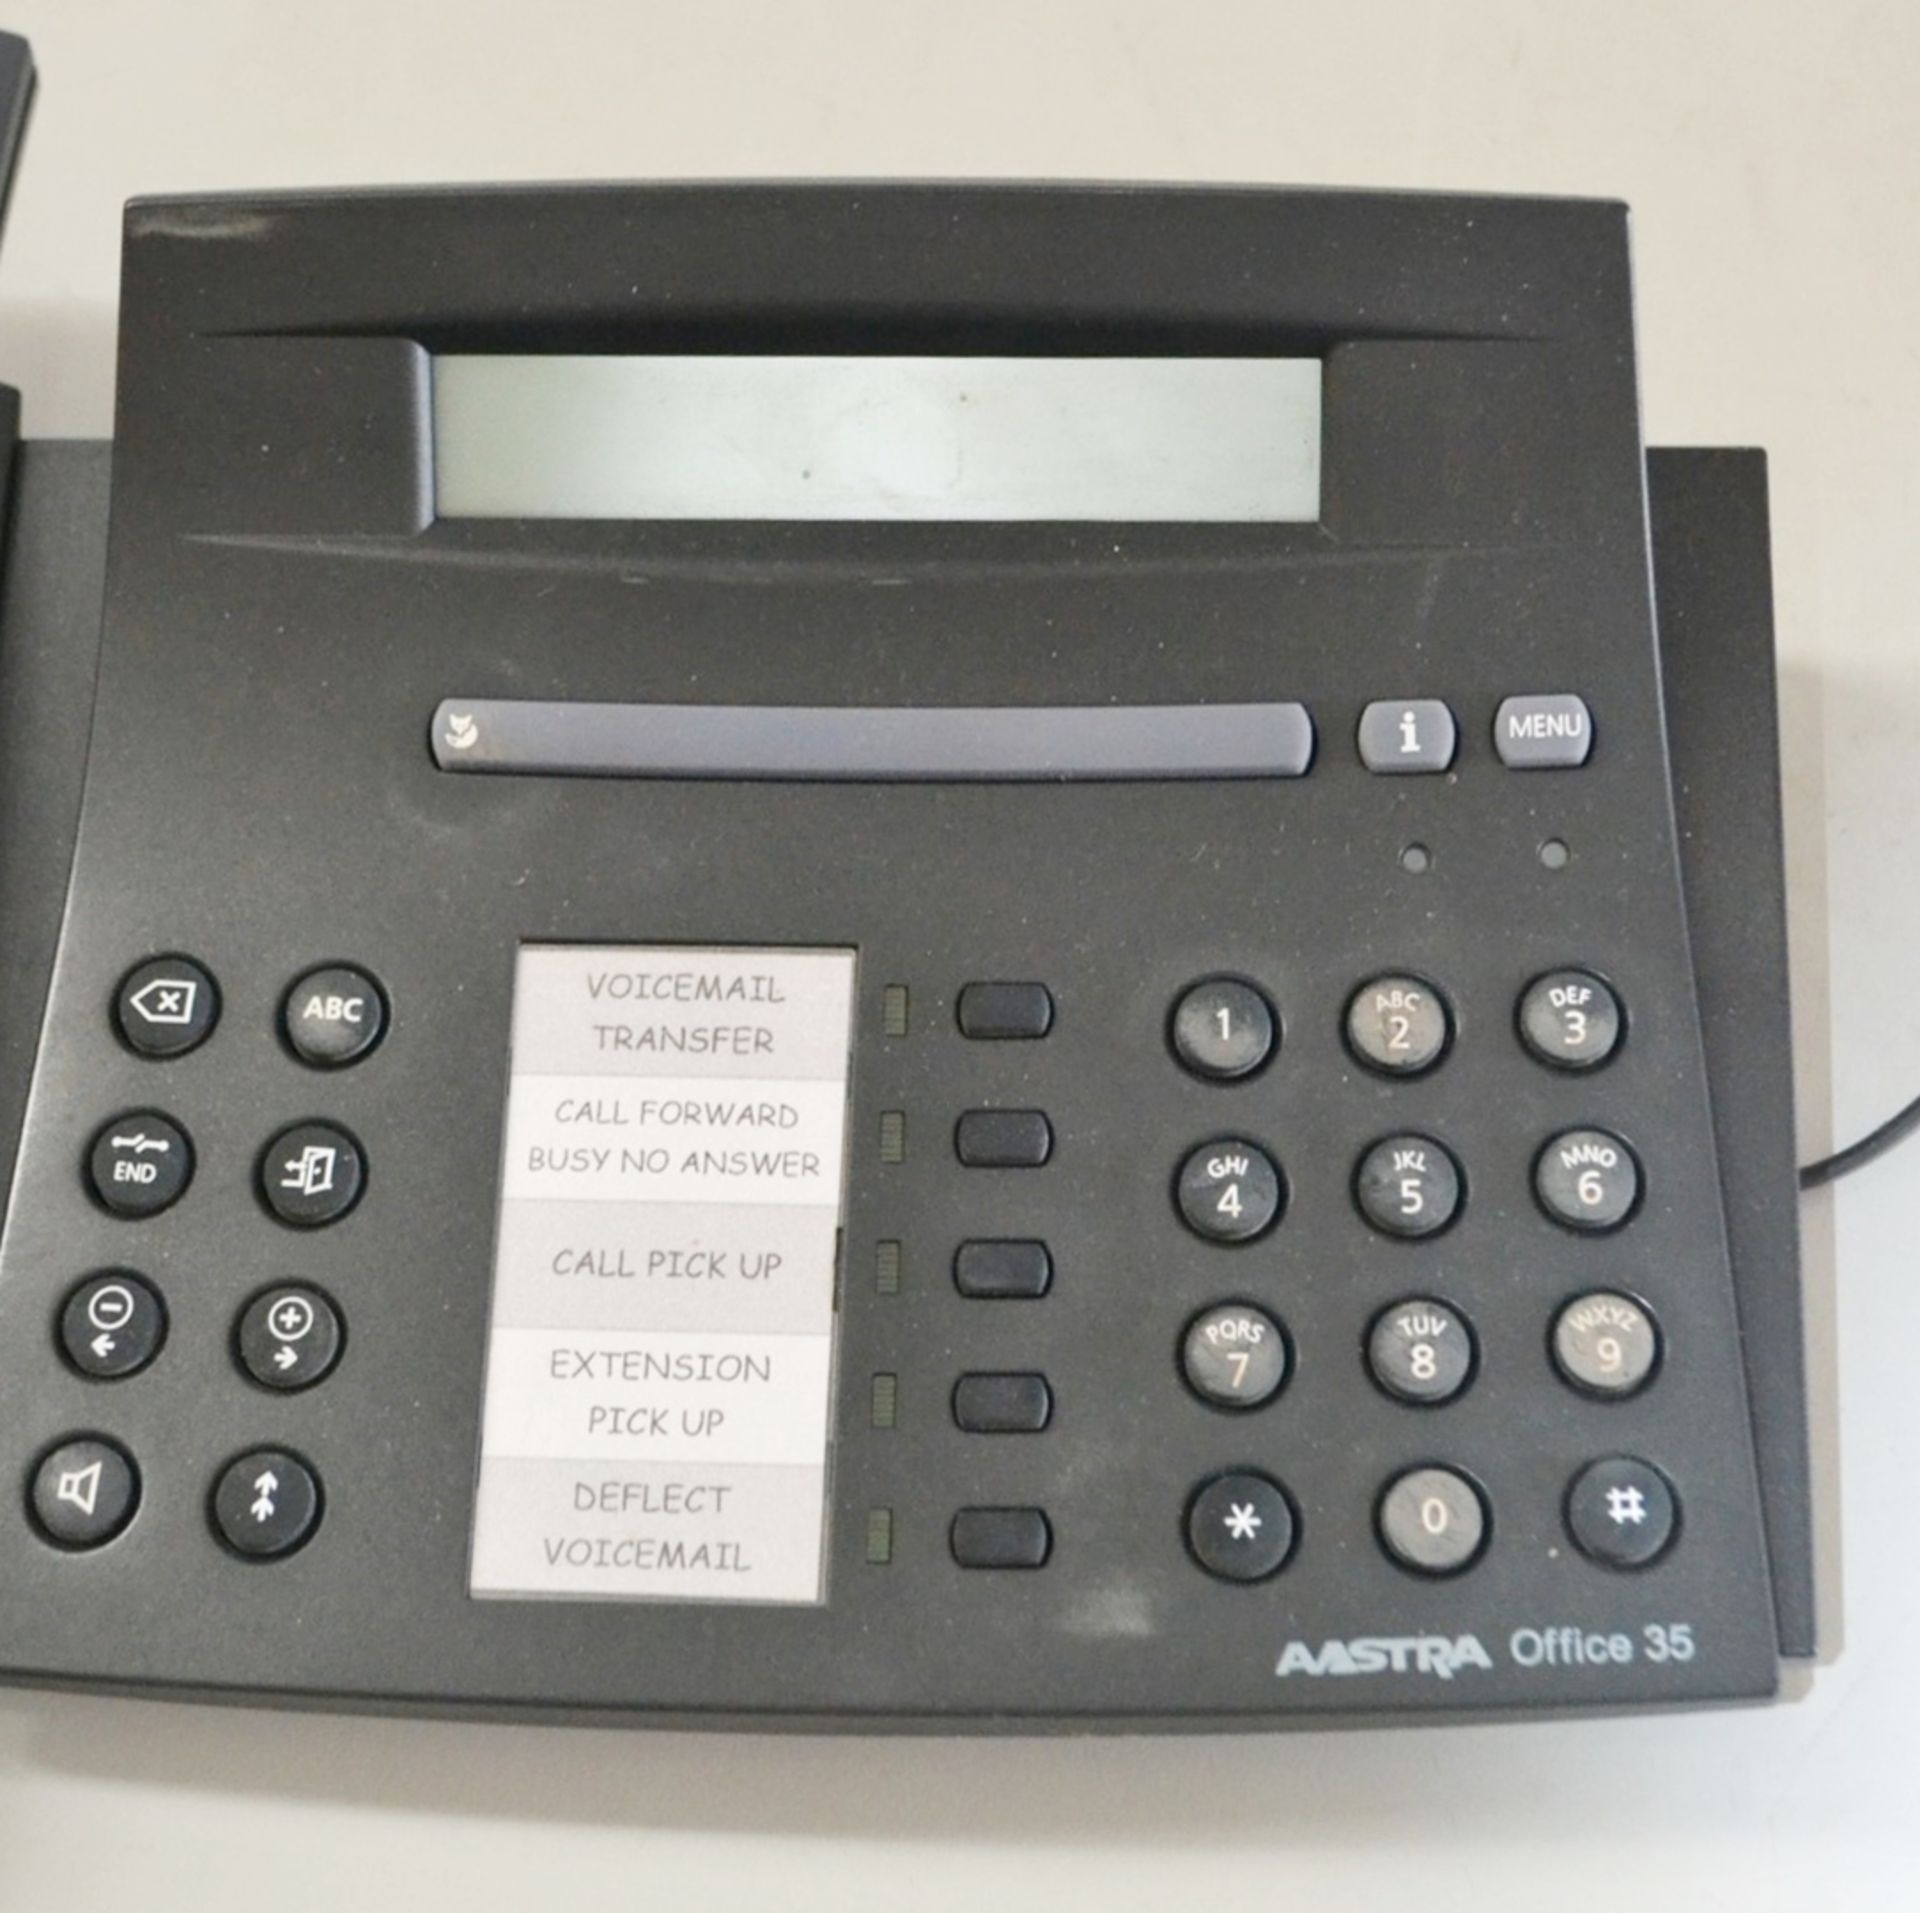 12 x Aastra Office 35 Digital Telephone Handsets Finished In Titanium Grey - Ref: LD378 - CL409 - - Image 4 of 9